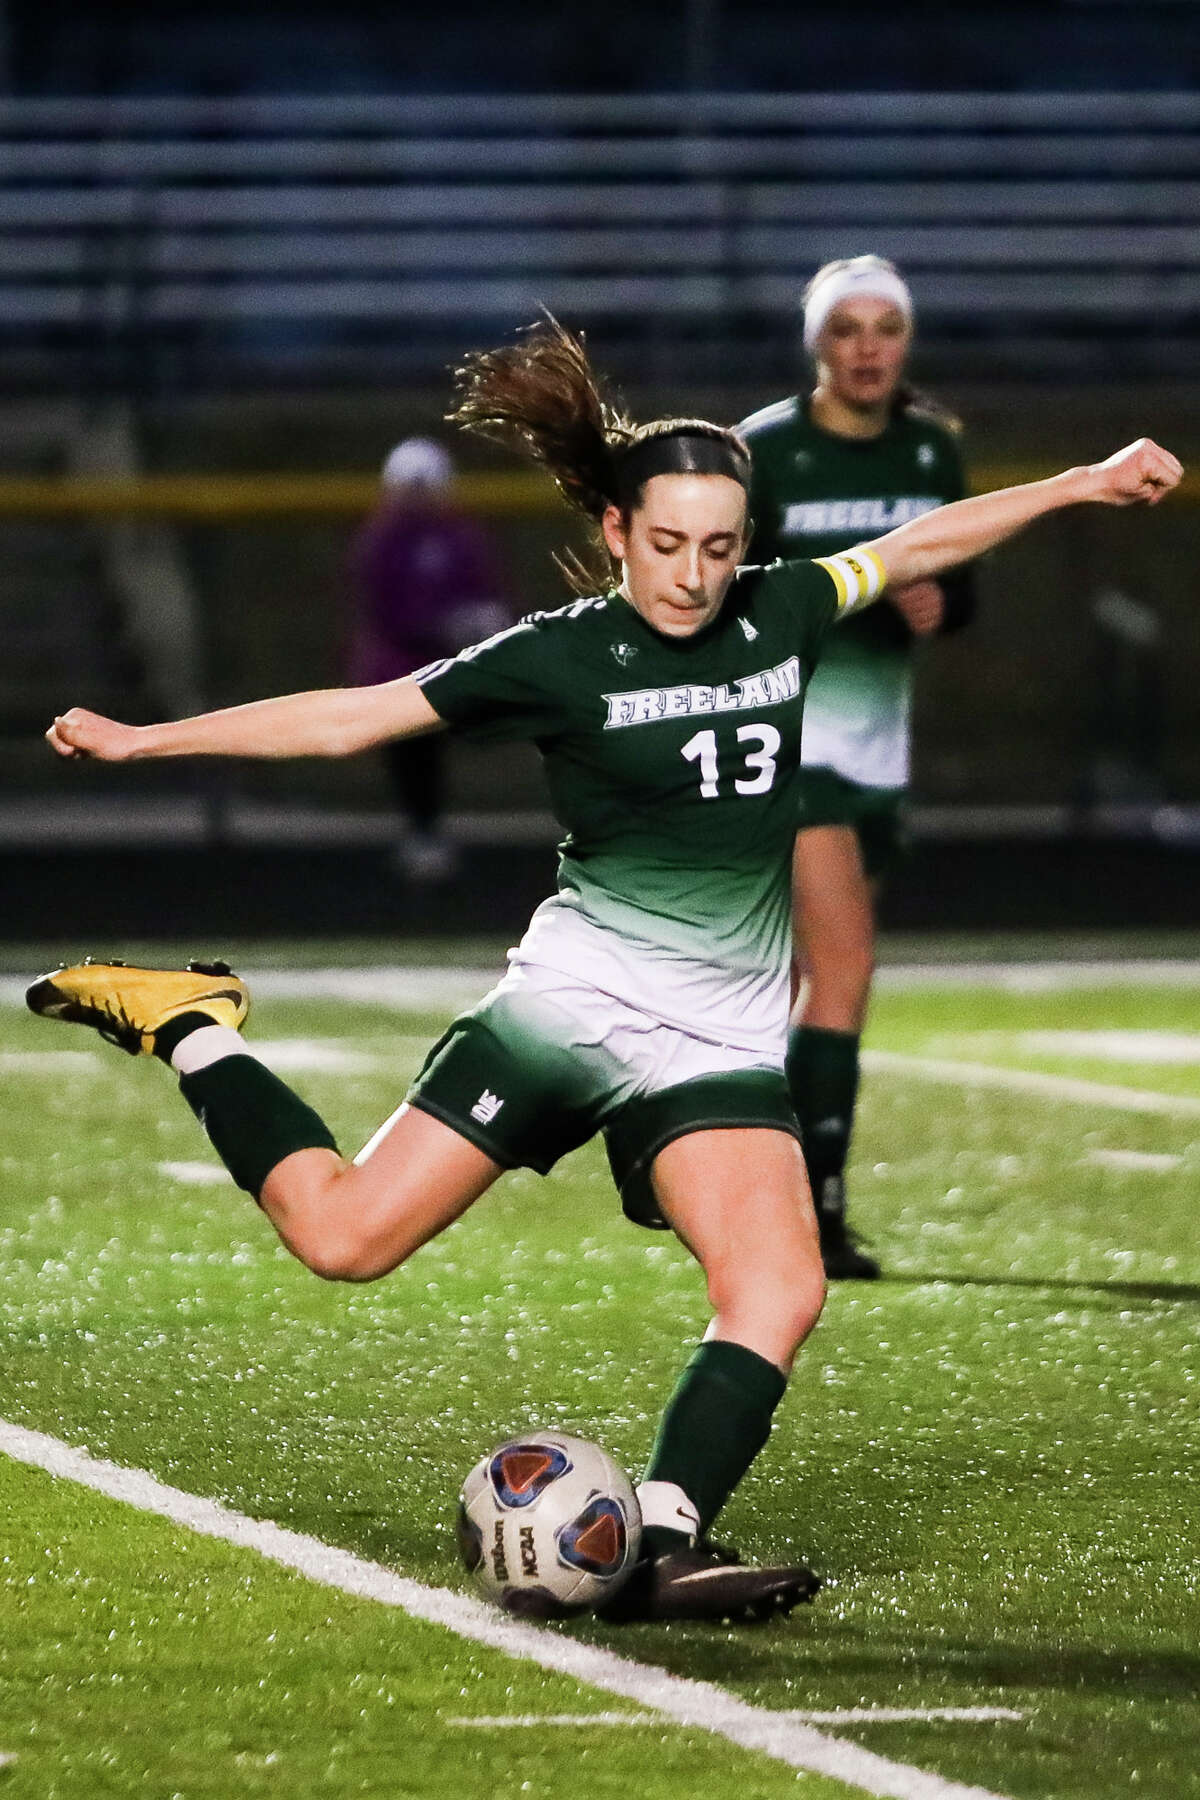 Freeland's Victoria Pilon sends the ball down the field during a game against Midland on Wednesday, April 3, 2019 at Freeland High School. (Katy Kildee/kkildee@mdn.net)